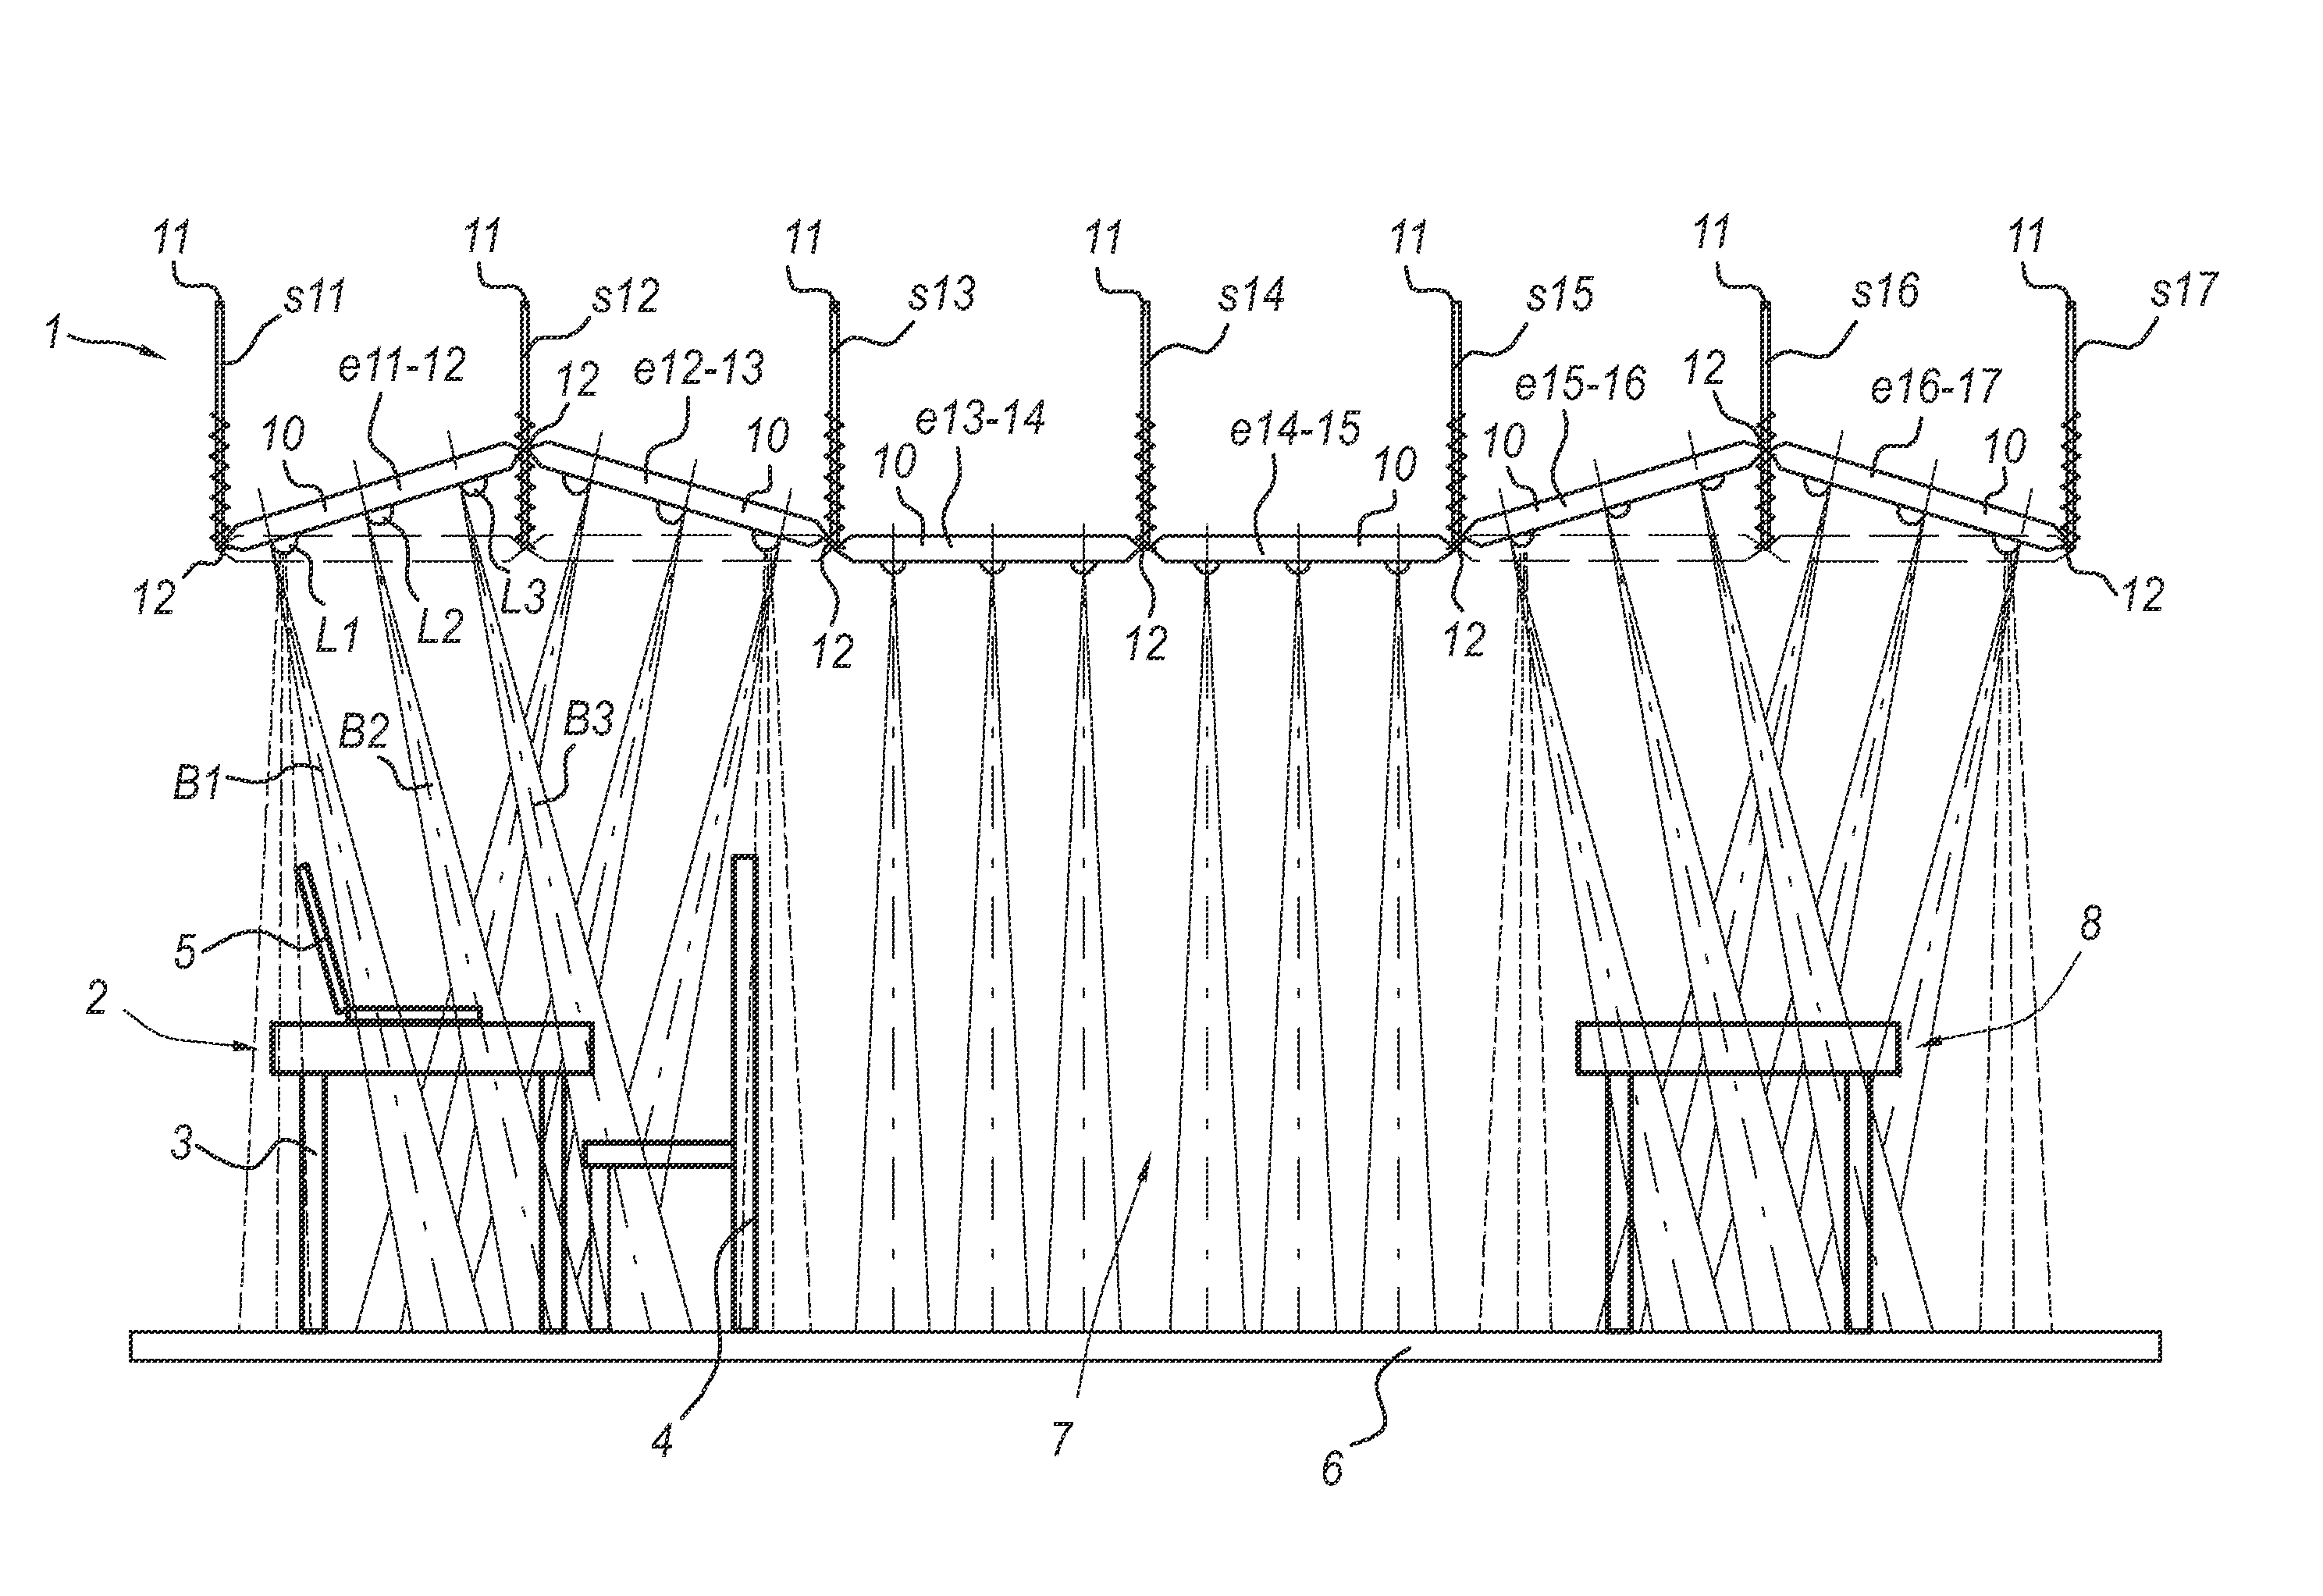 Lighting system, space with a lighting system, and method of providing an illumination profile using such a lighting system